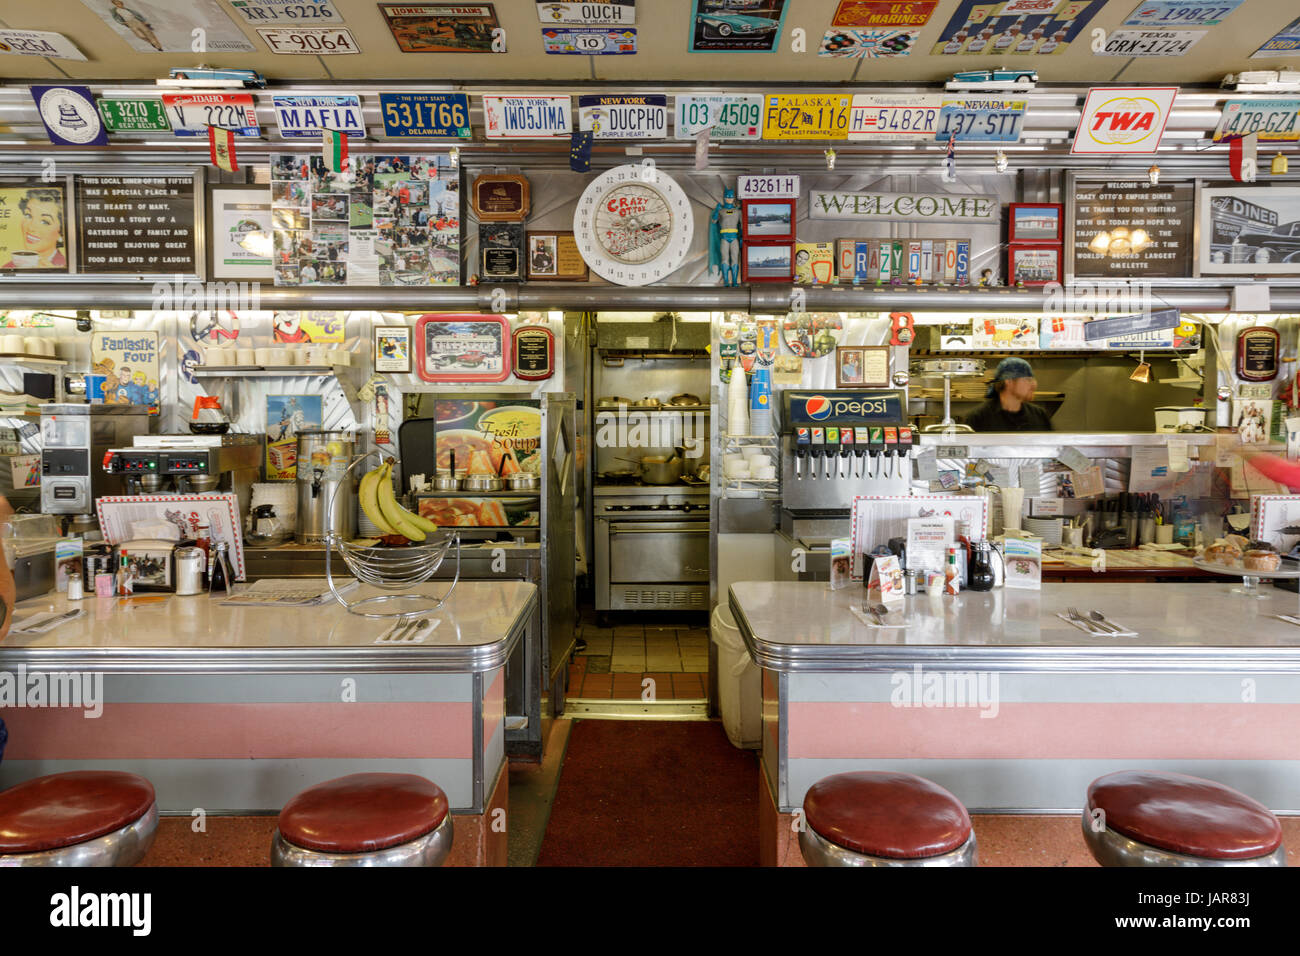 Herkimer, New York, USA – June 5, 2017: Crazy Otto's Empire Diner was voted Best Diner in New York State for 2017. Stock Photo